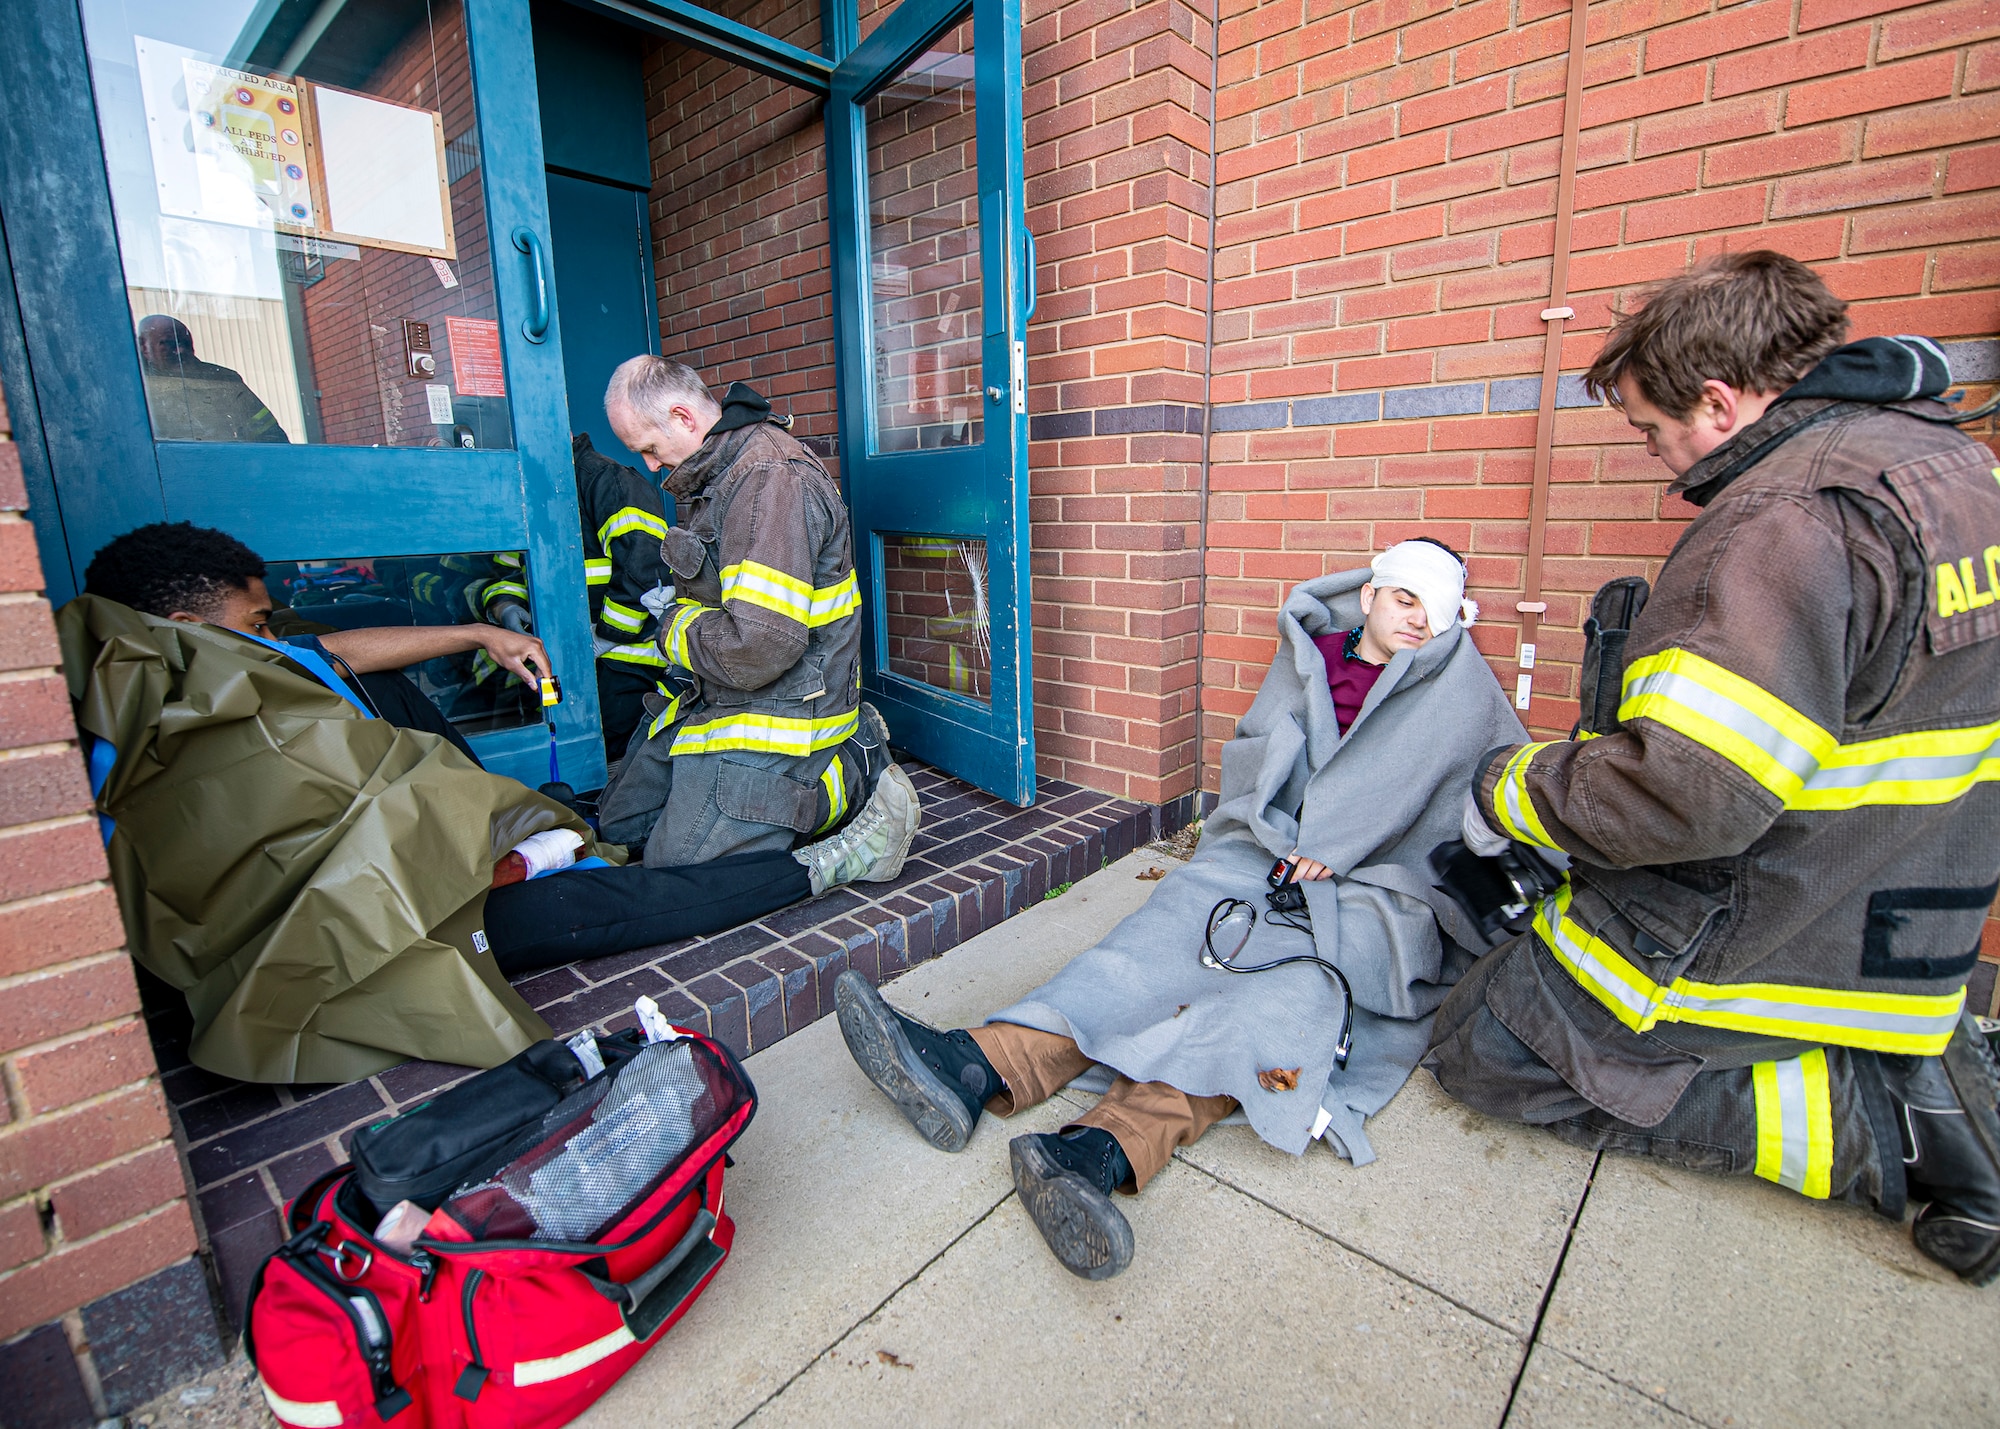 Firefighters from the 422d Civil Engineer Squadron, tend to simulated victims during a readiness exercise, at RAF Molesworth, England, Feb. 11, 2020. The exercise tested the wing’s preparedness and response capabilities to an emergency situation. (U.S. Air Force photo by Senior Airman Eugene Oliver)